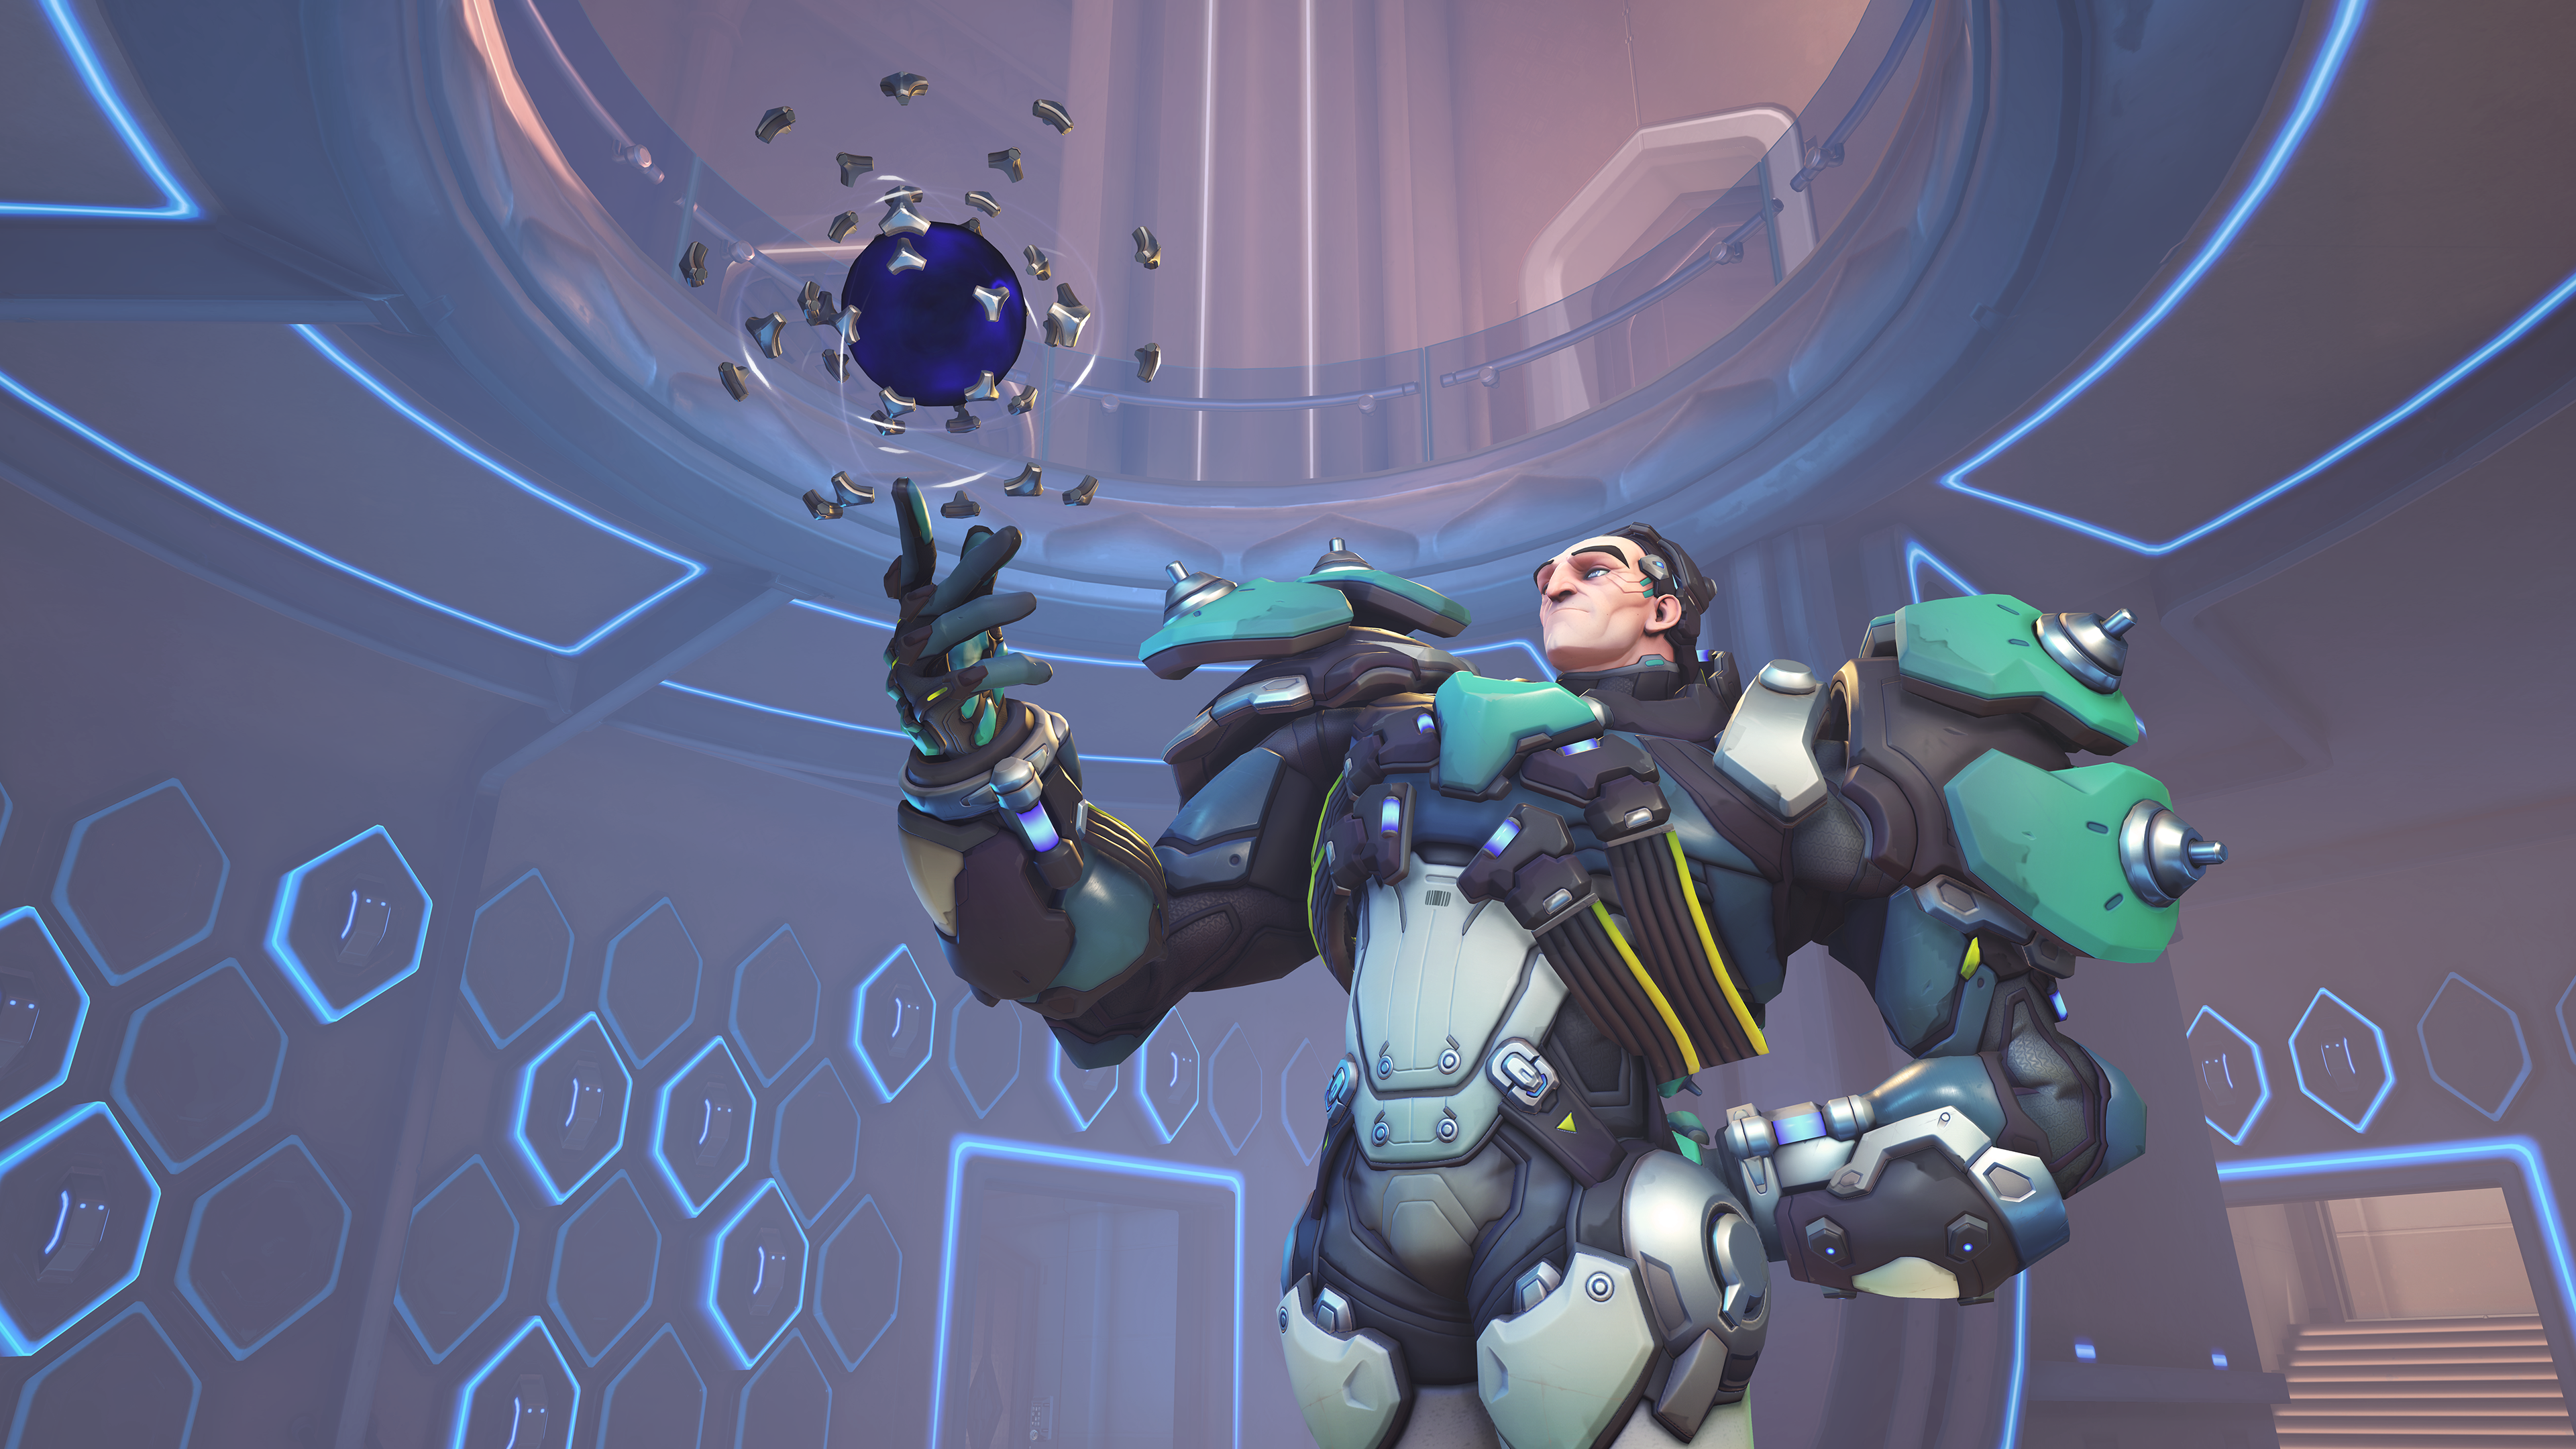 Sigma from Overwatch 2 looks at a deconstructed sphere, floating above his hands.